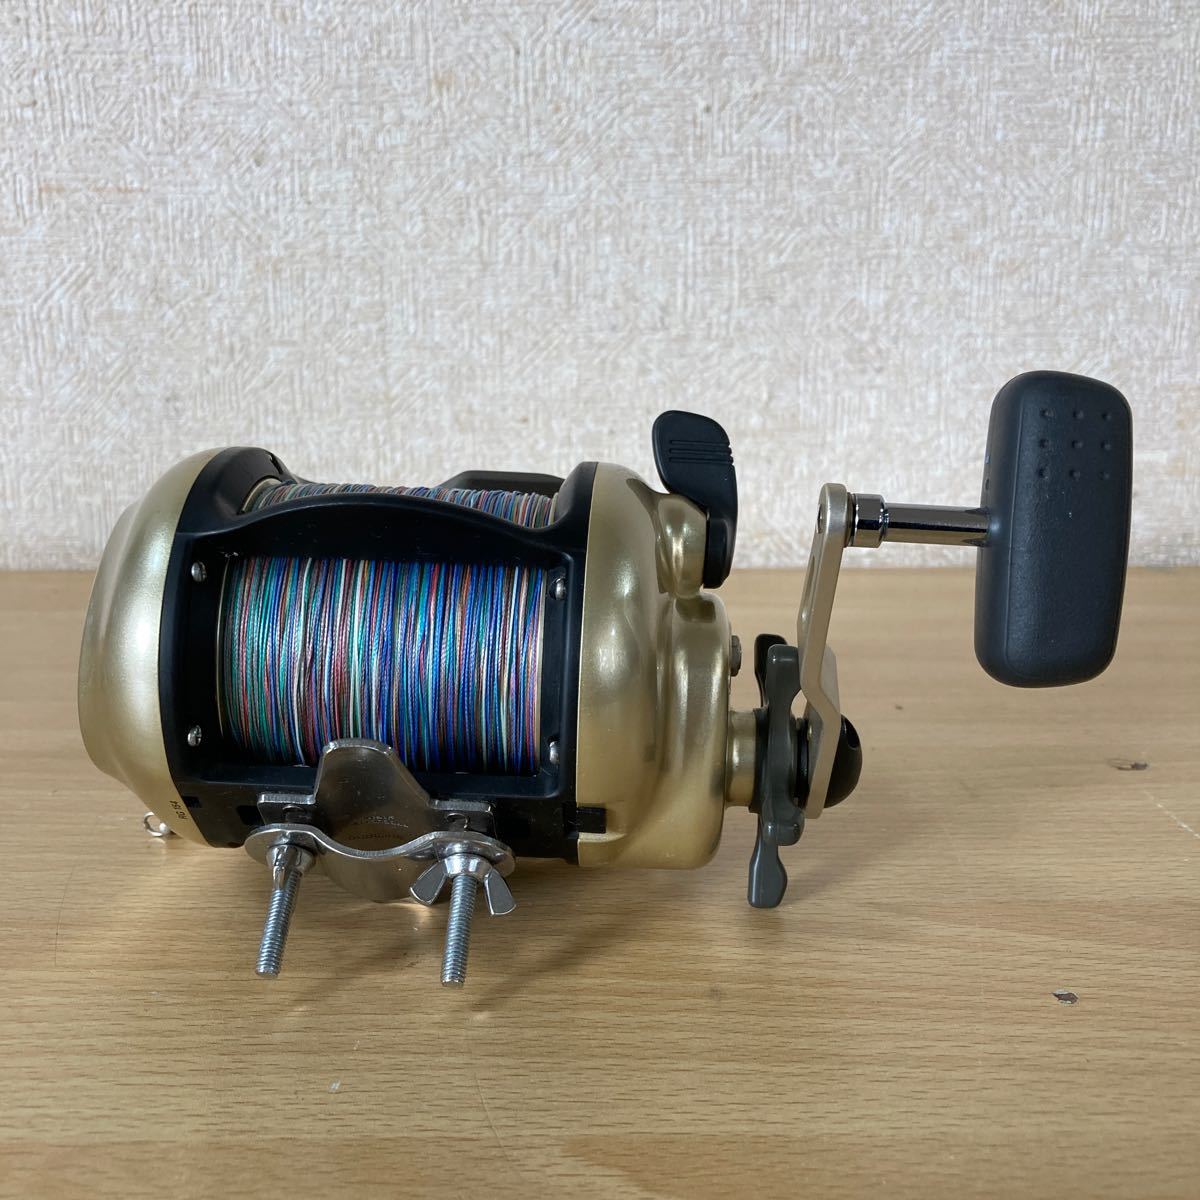 SHIMANO シマノ 4000HP 電動丸 ケーブル付き 船用 電動リール リール 釣り 釣具 釣り具 釣り道具 フィッシング 収納袋付き 11 カ 6097_画像7